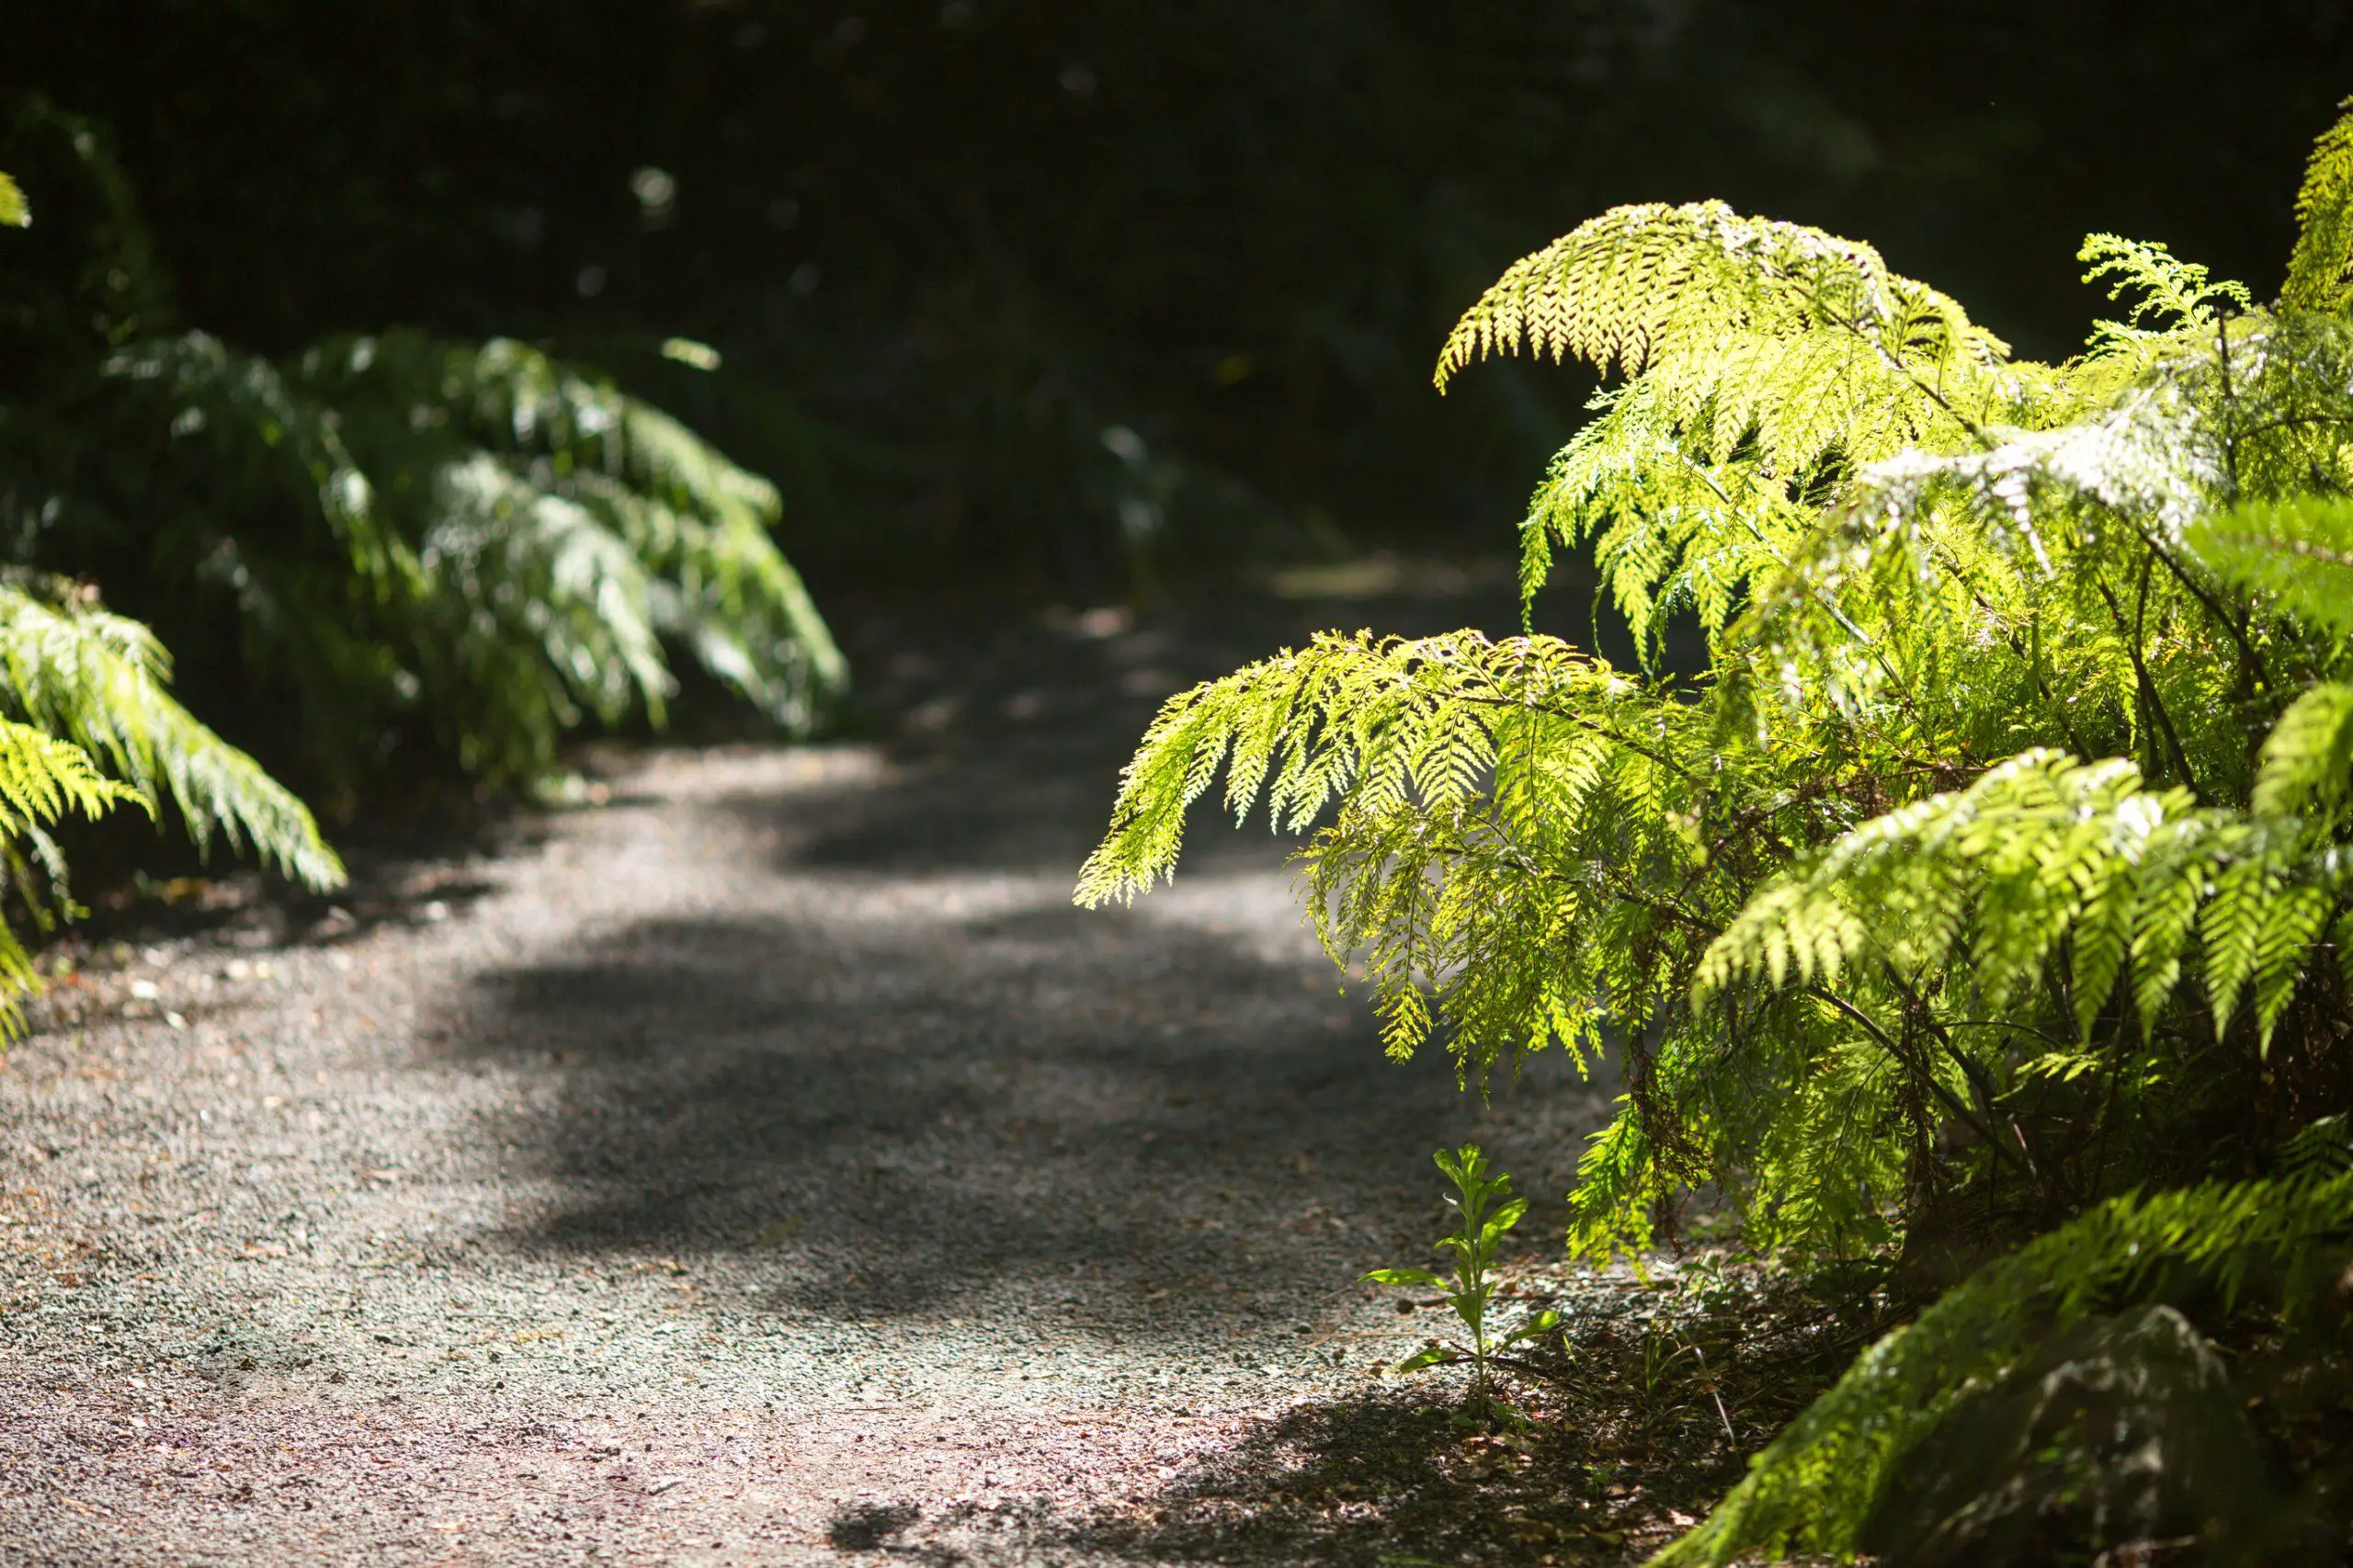 A fern plant growing on the side of gravel path